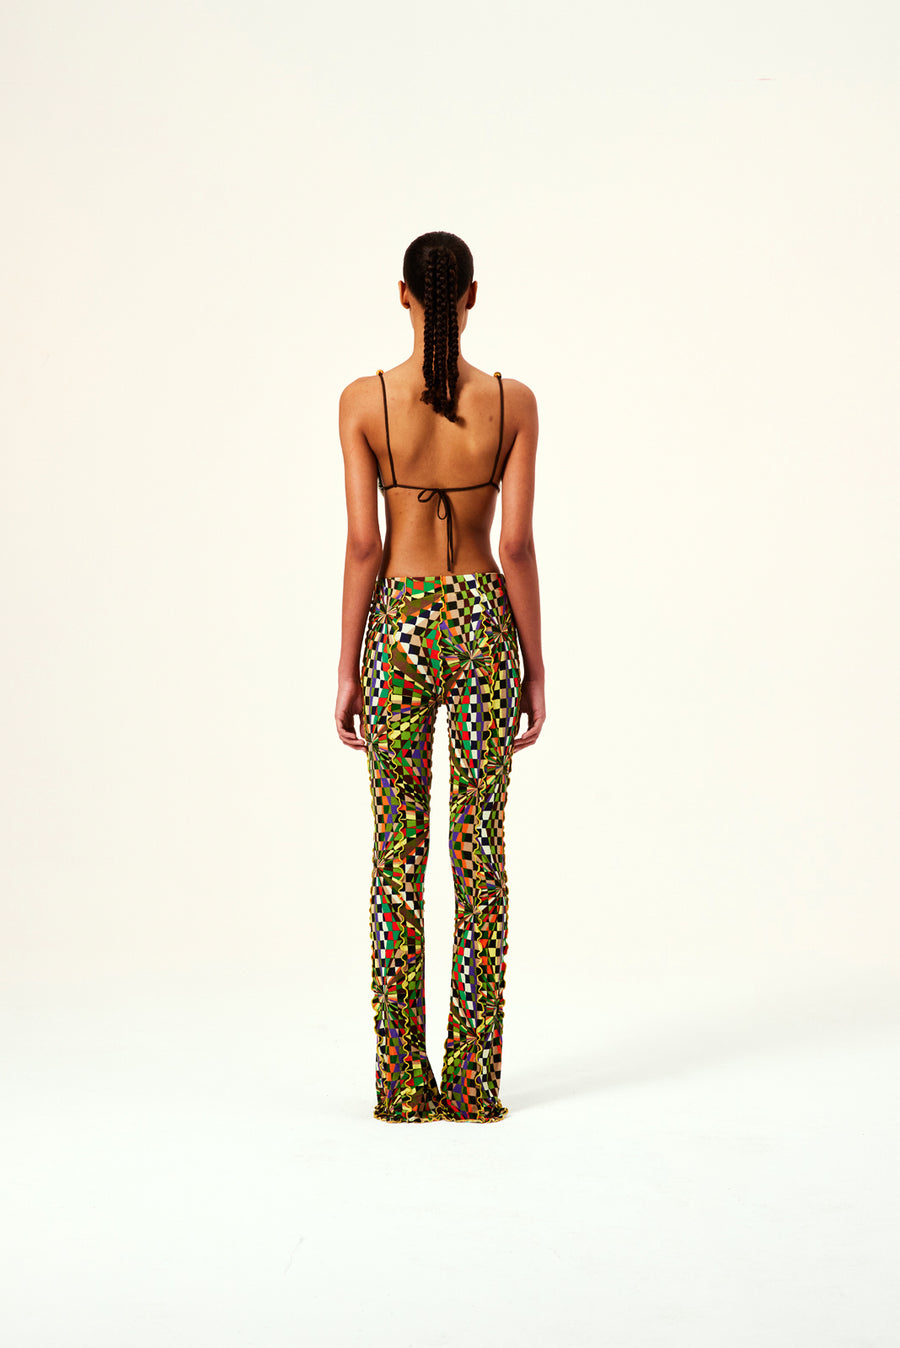 MULT - Kaleidoscope printed pants with contrast stitching